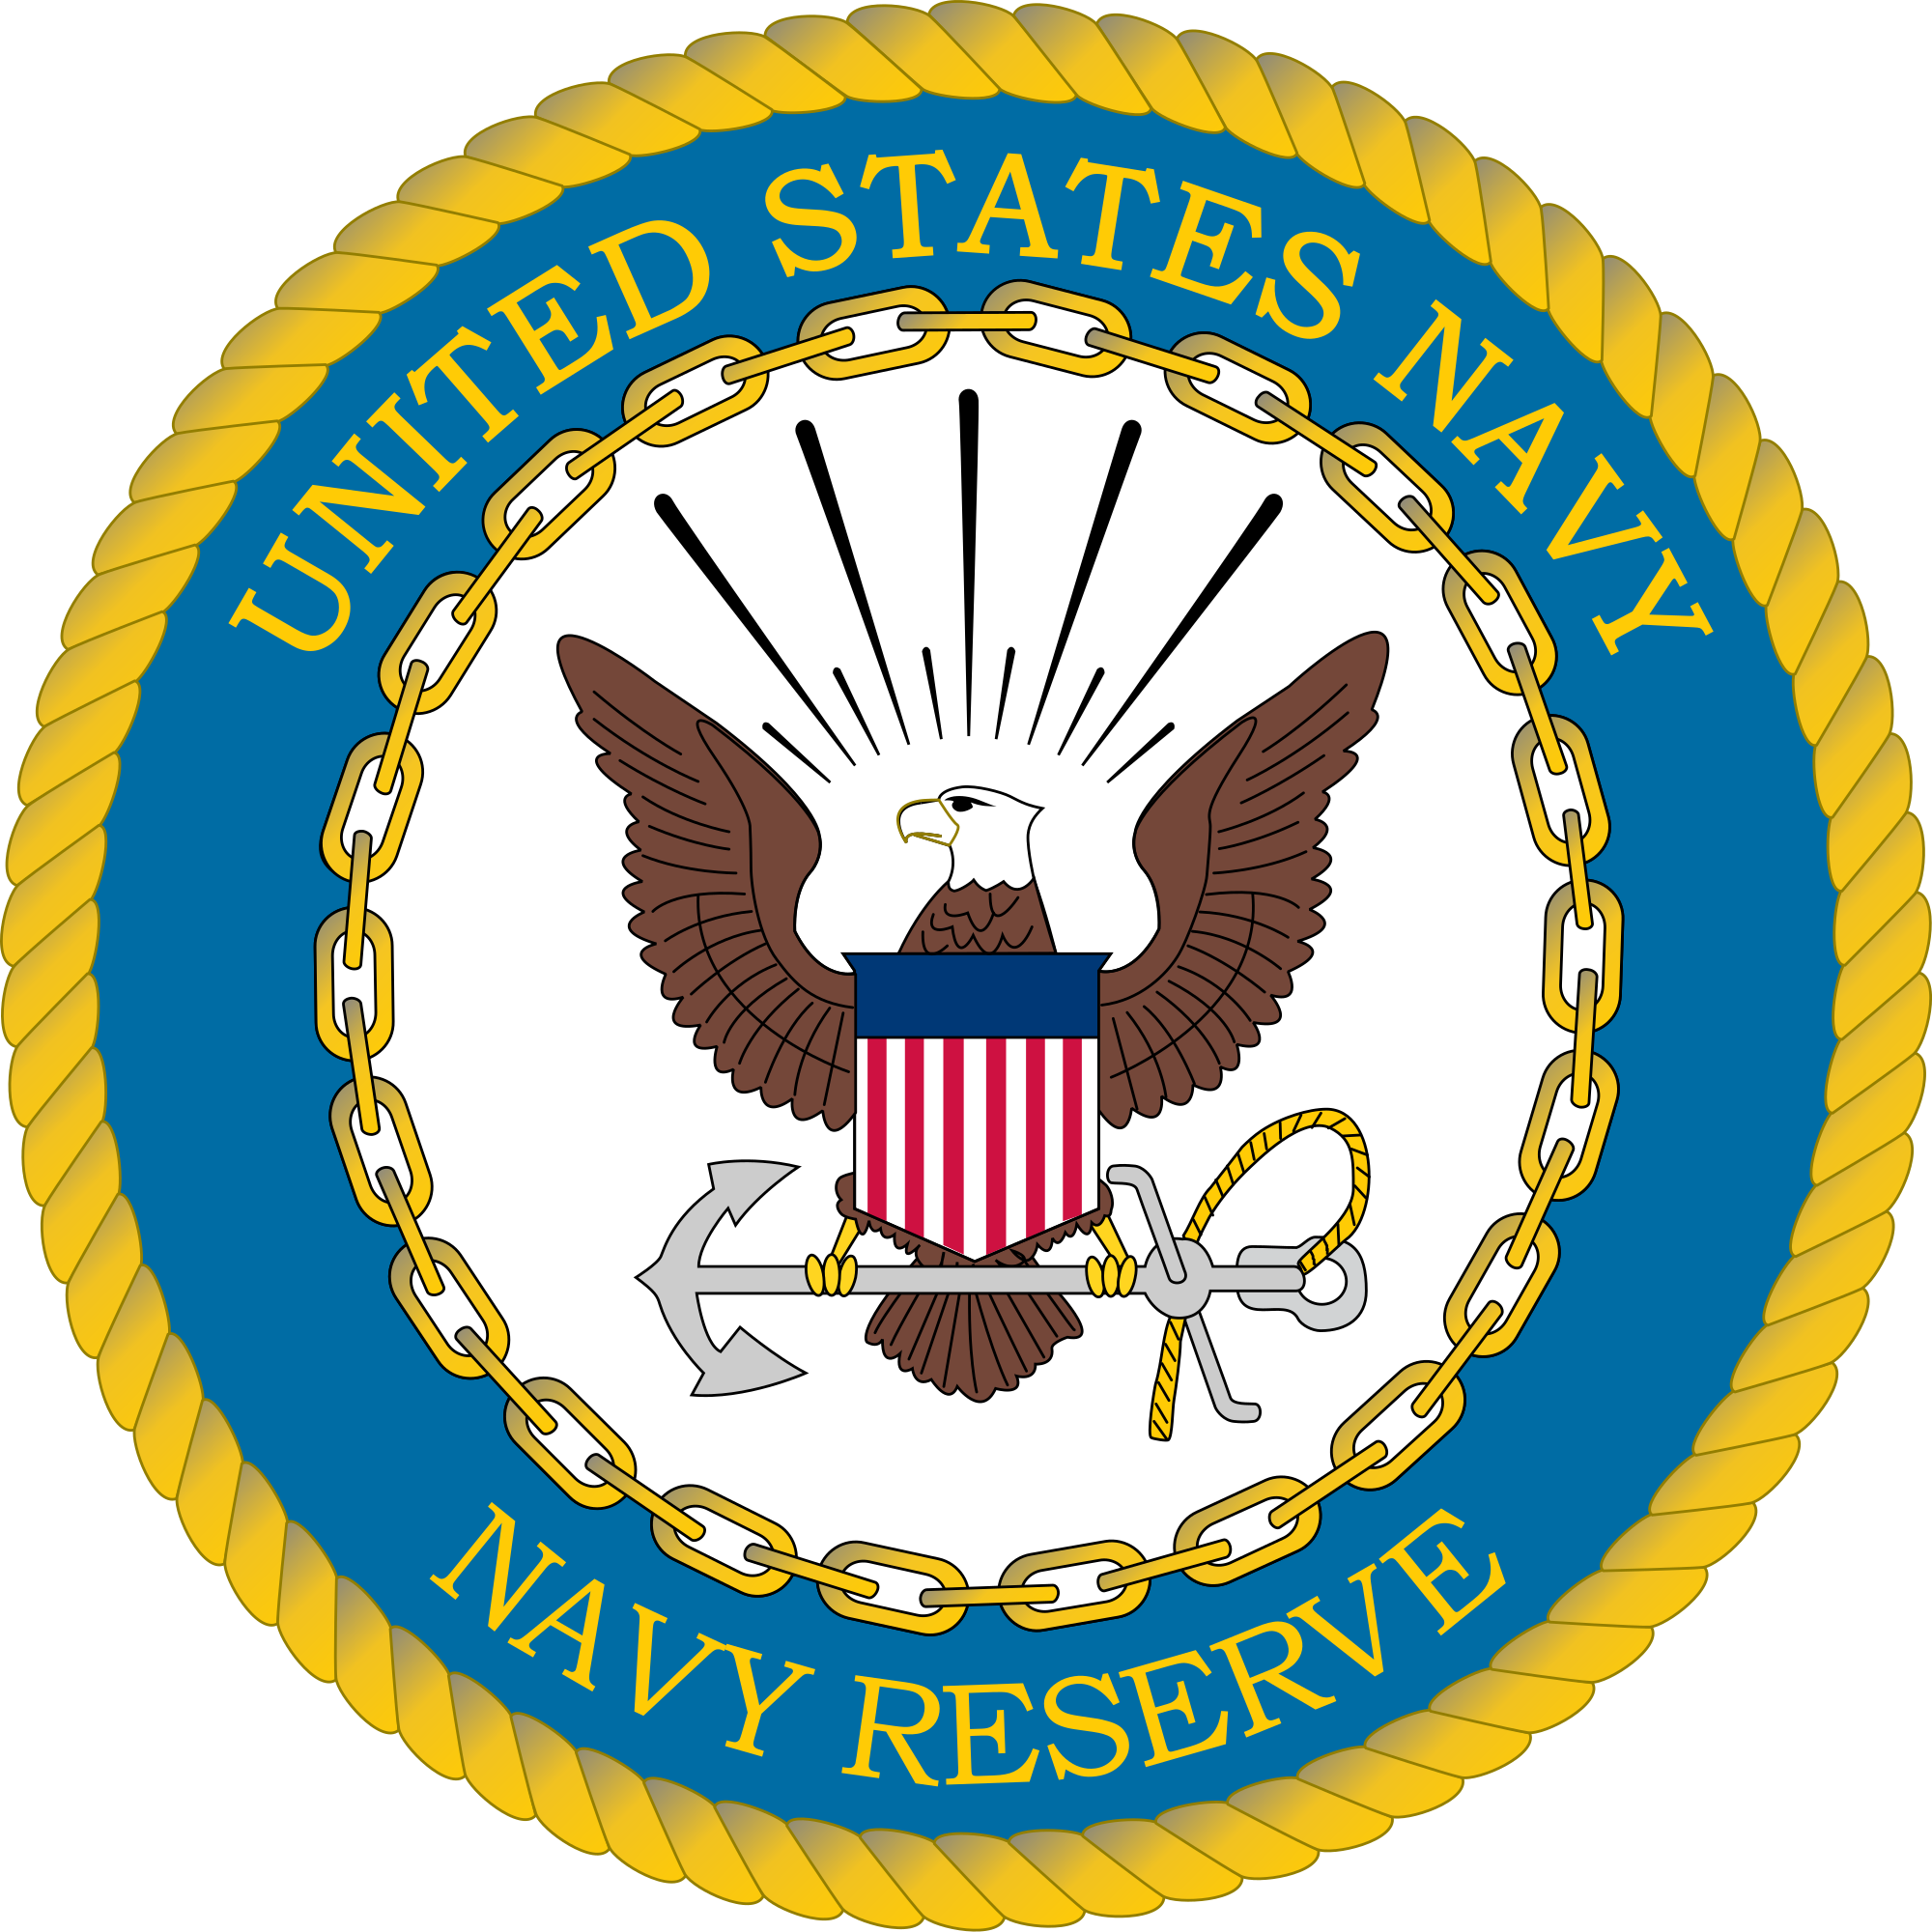 Seal Of The United States Navy Reserve - United States Navy Reserve (2000x2000)